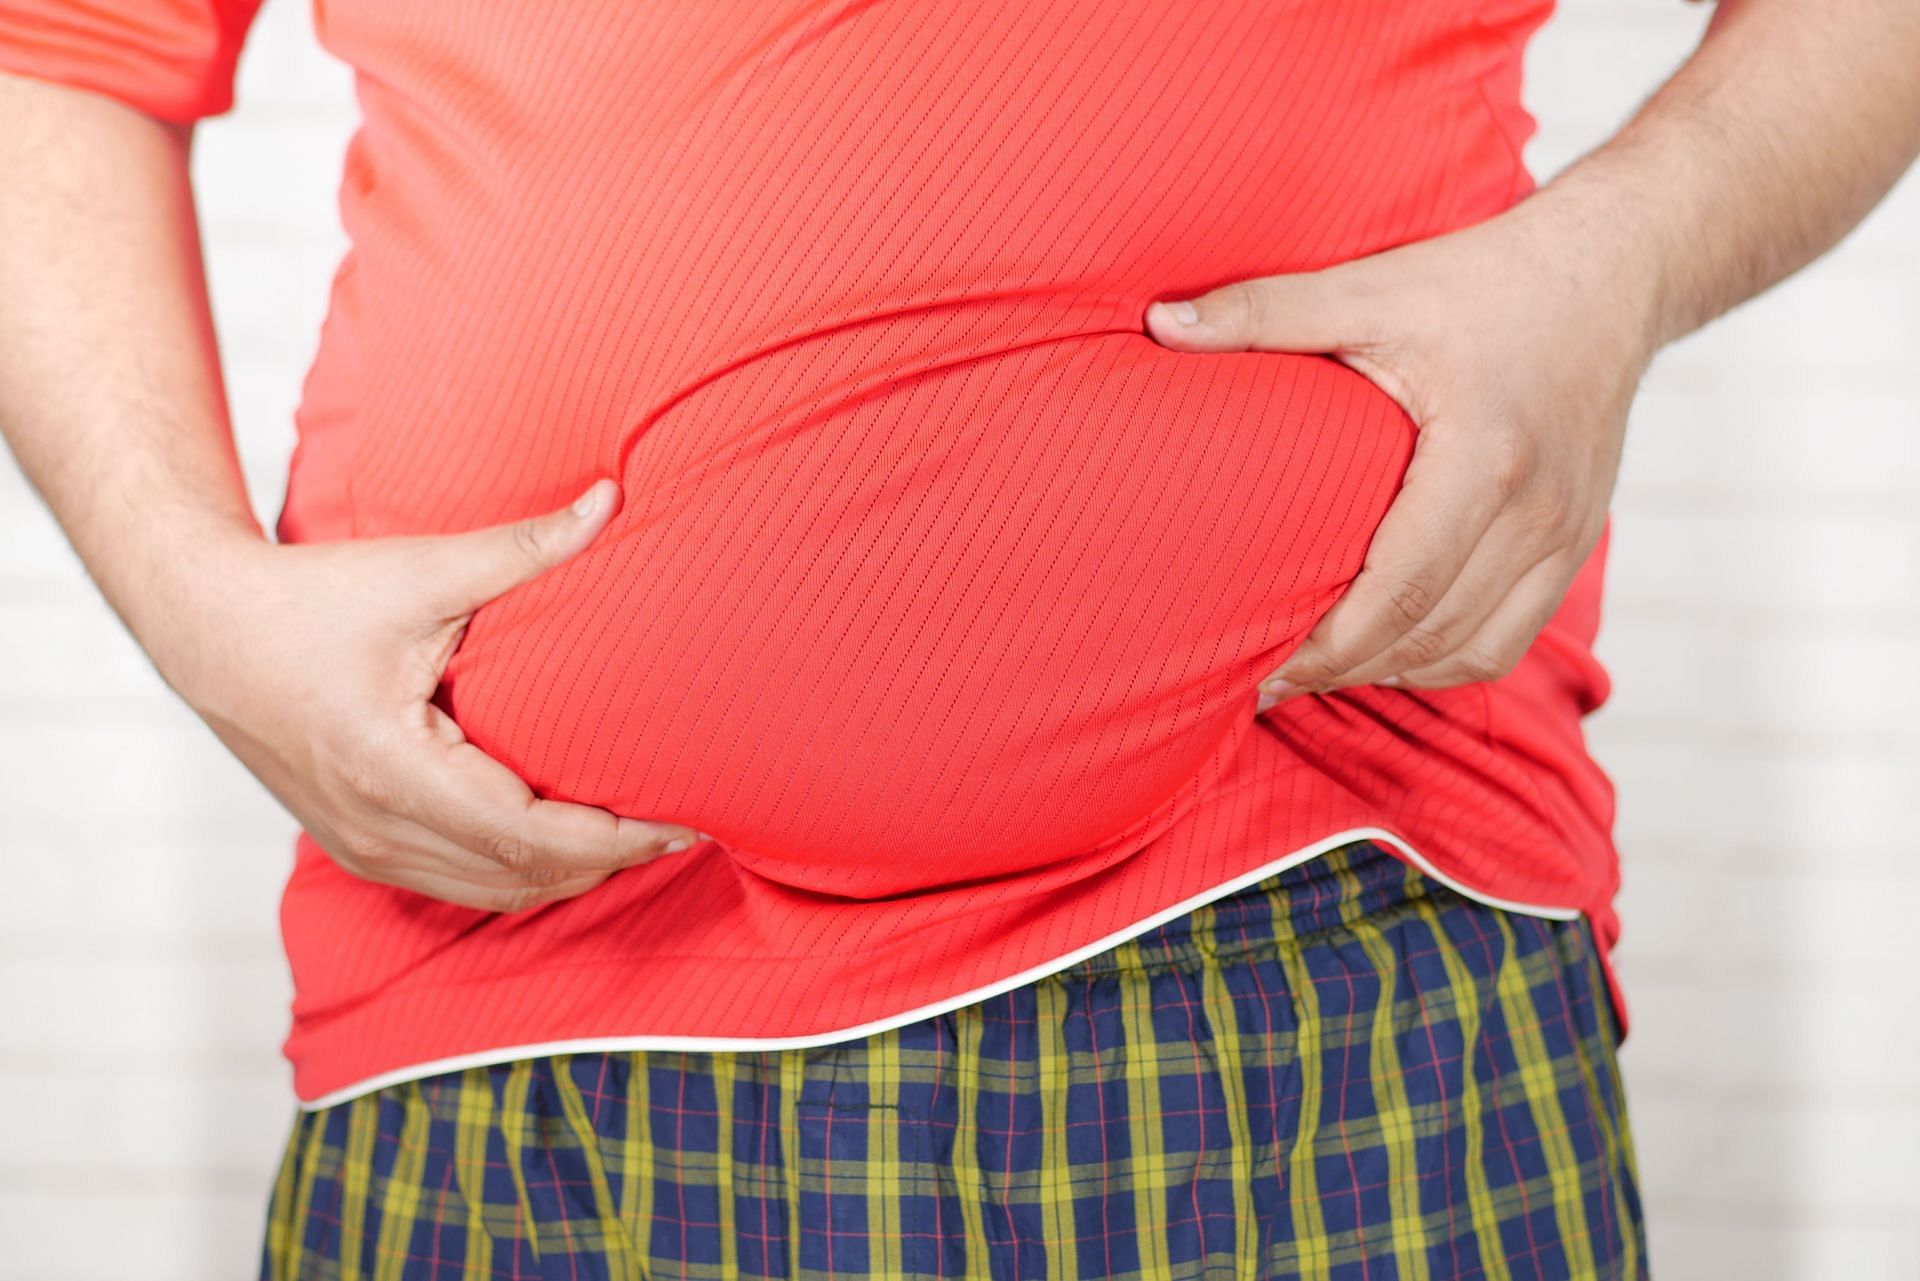 Are you suffering from piles and are bloated? (Image by Towfiqu Barbhuiya/Pexels)